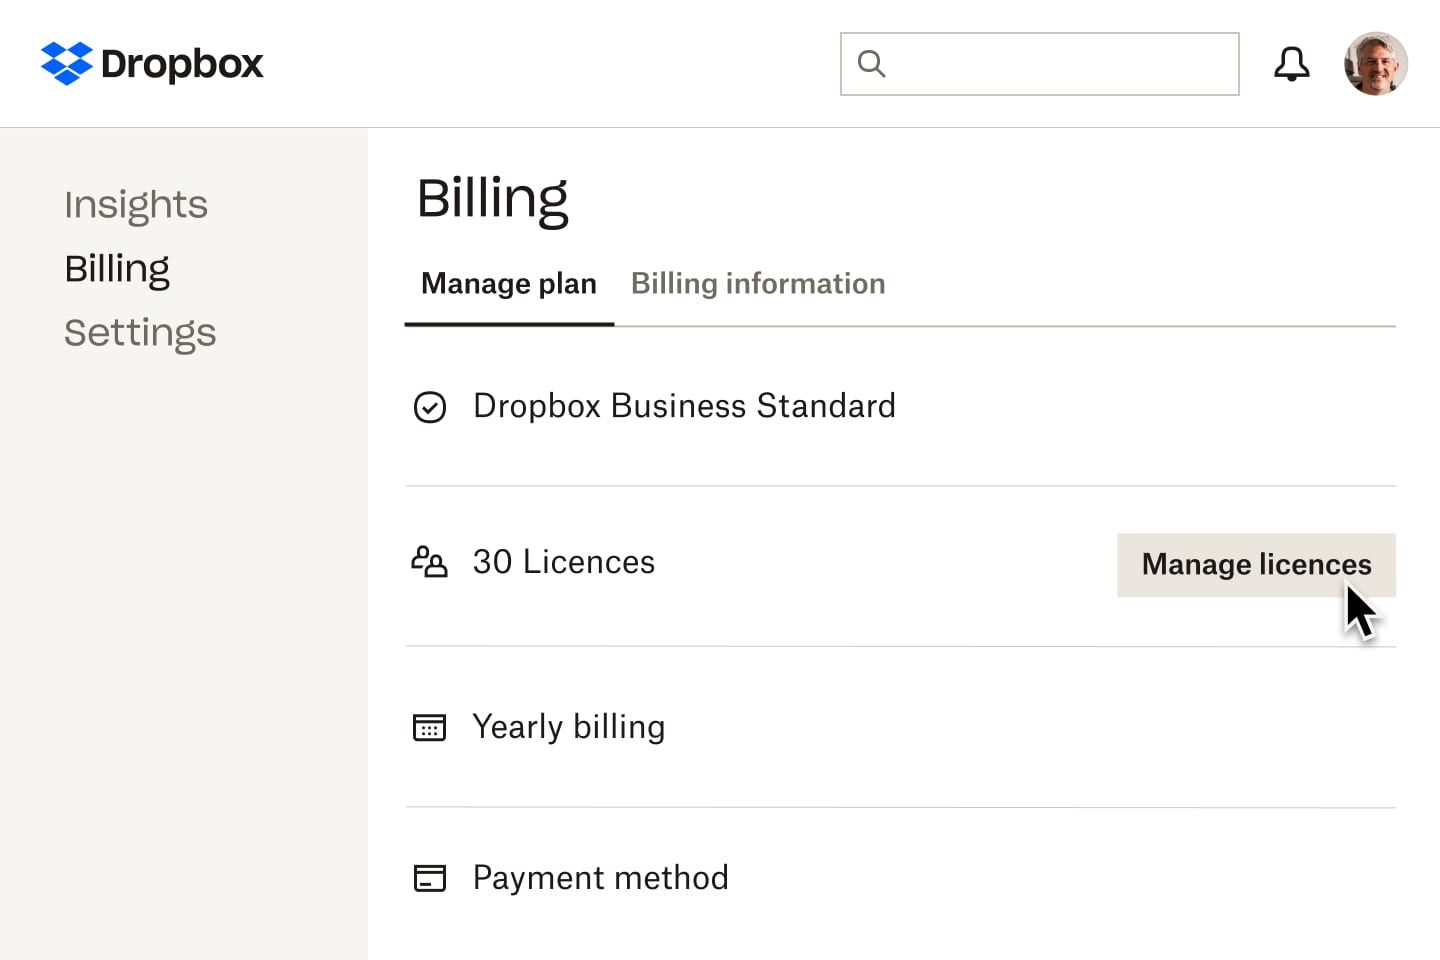 The Billing view in Dropbox that displays a user’s subscription type, how many licences are associated with the account, the billing schedule and the payment method